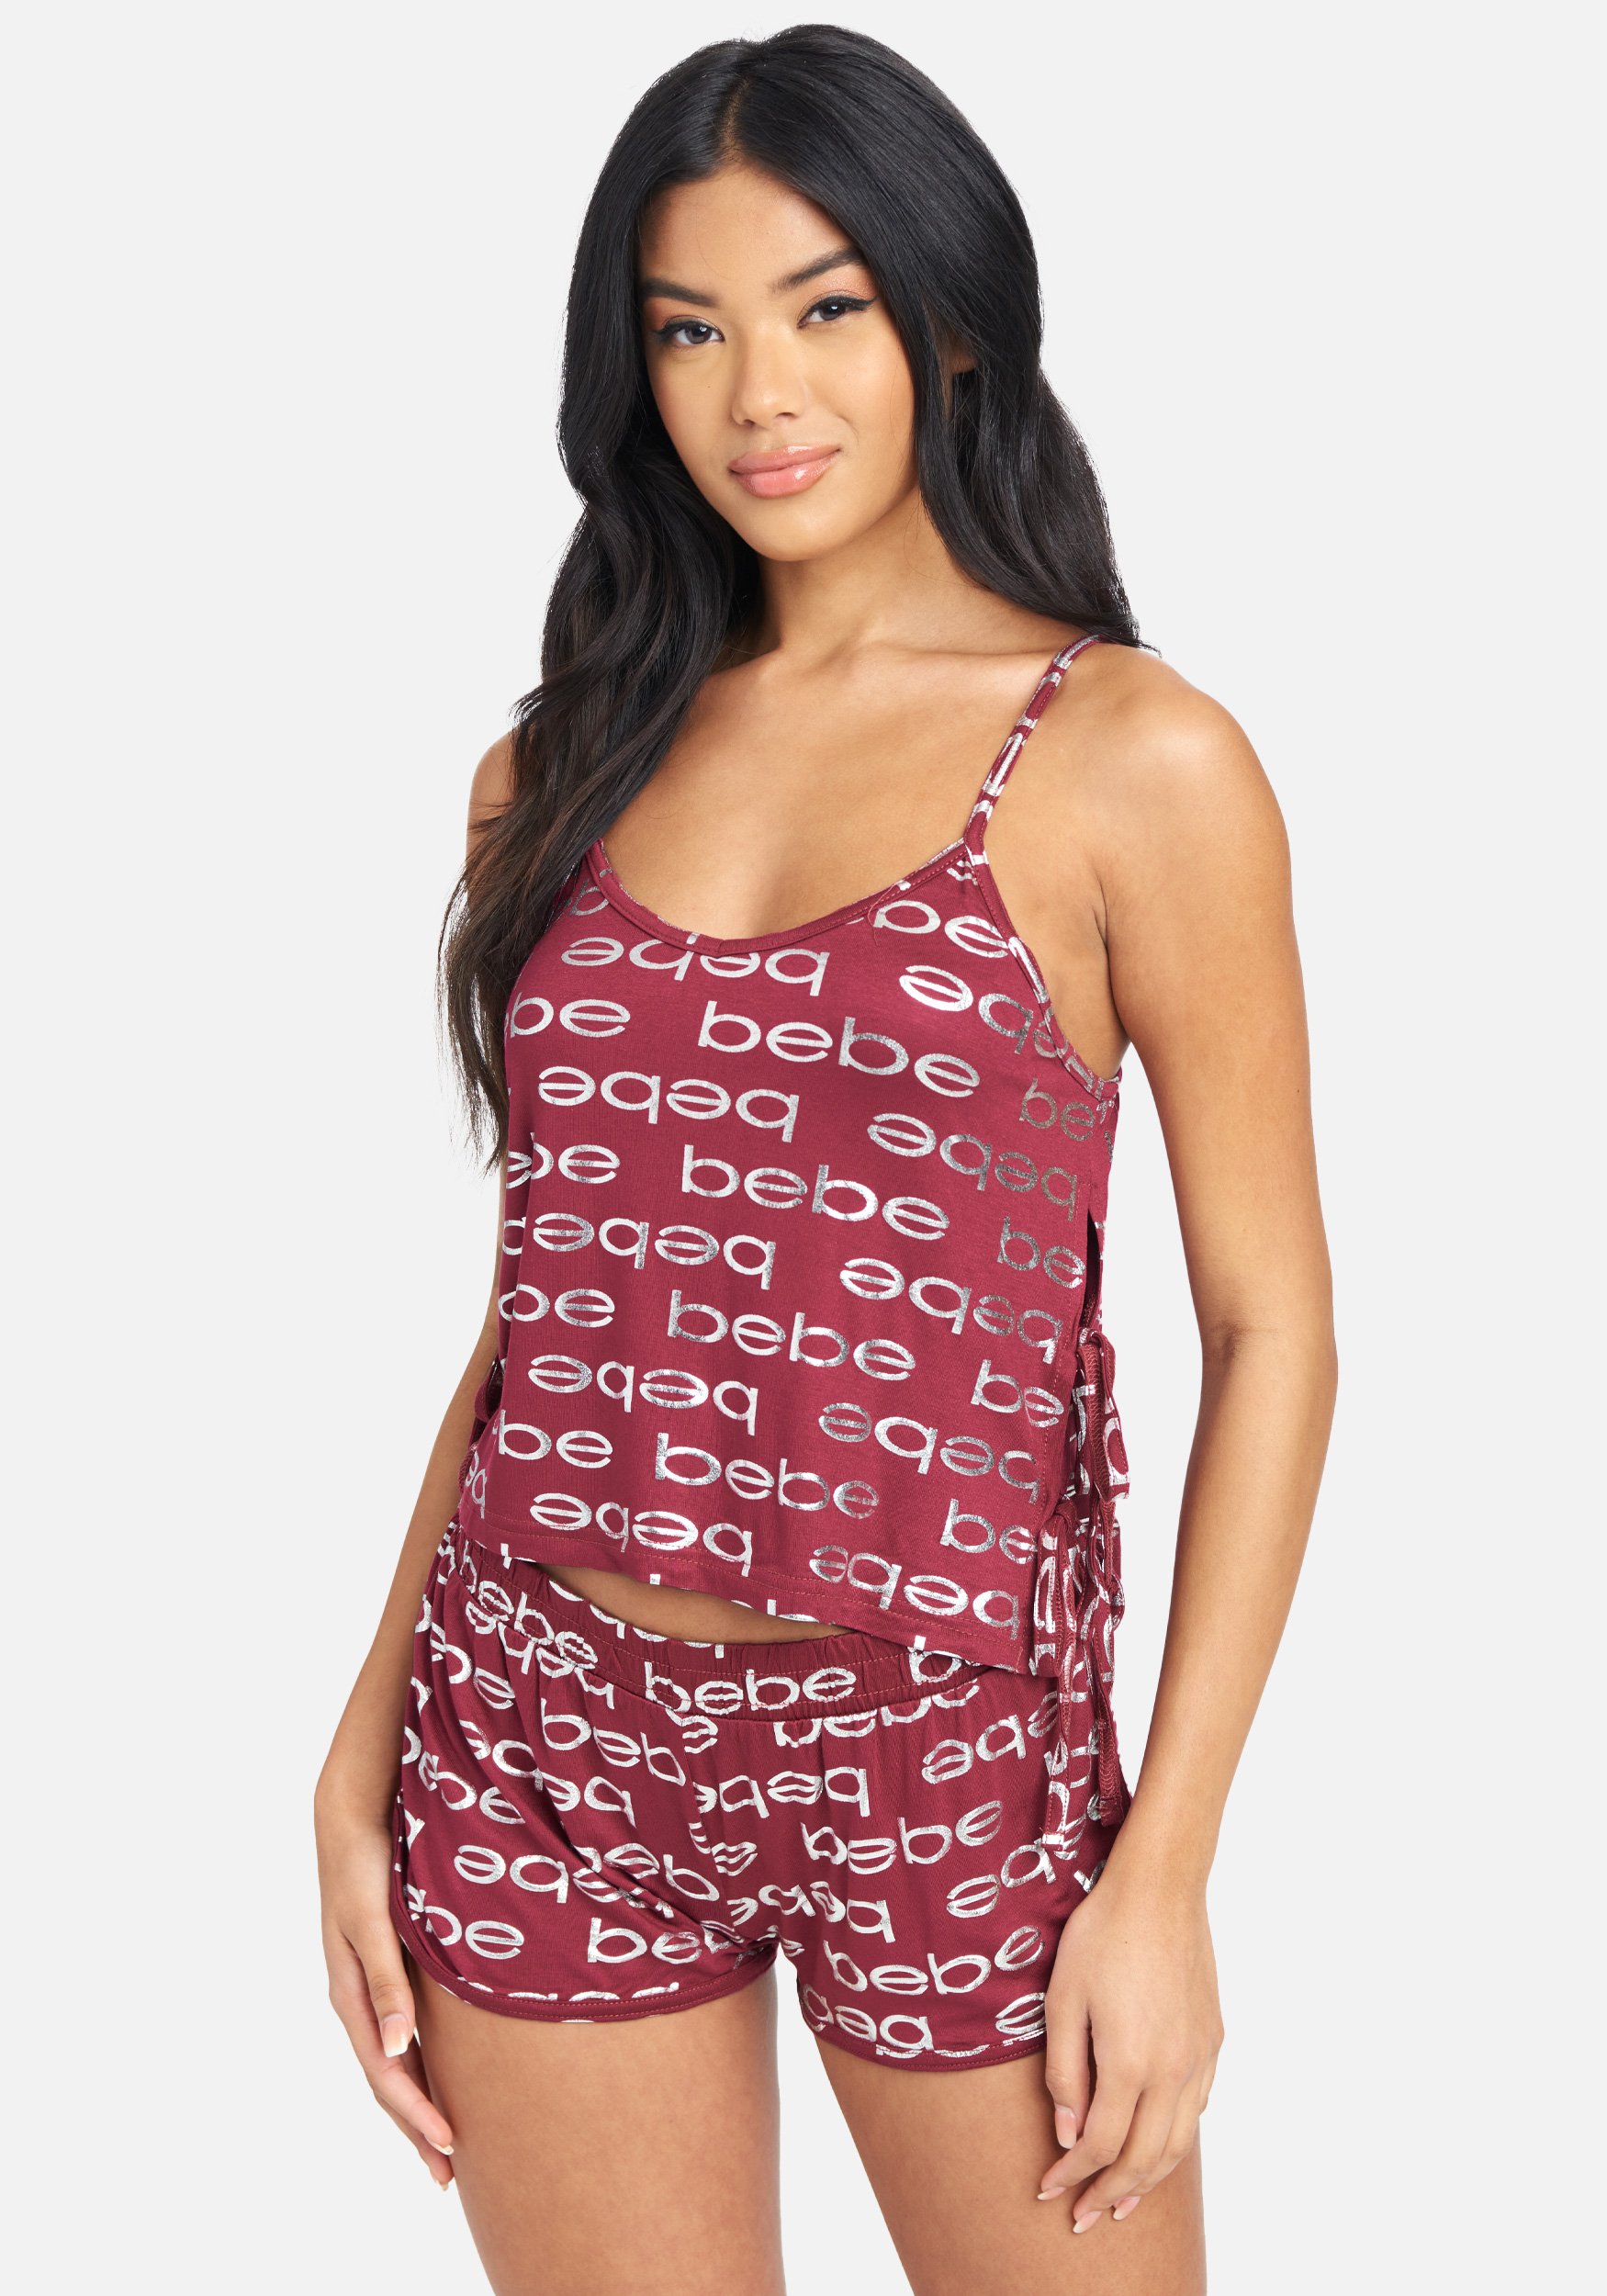 Women's Allover Printed Bebe Lace Up Short Set, Size Medium in Plum Spandex